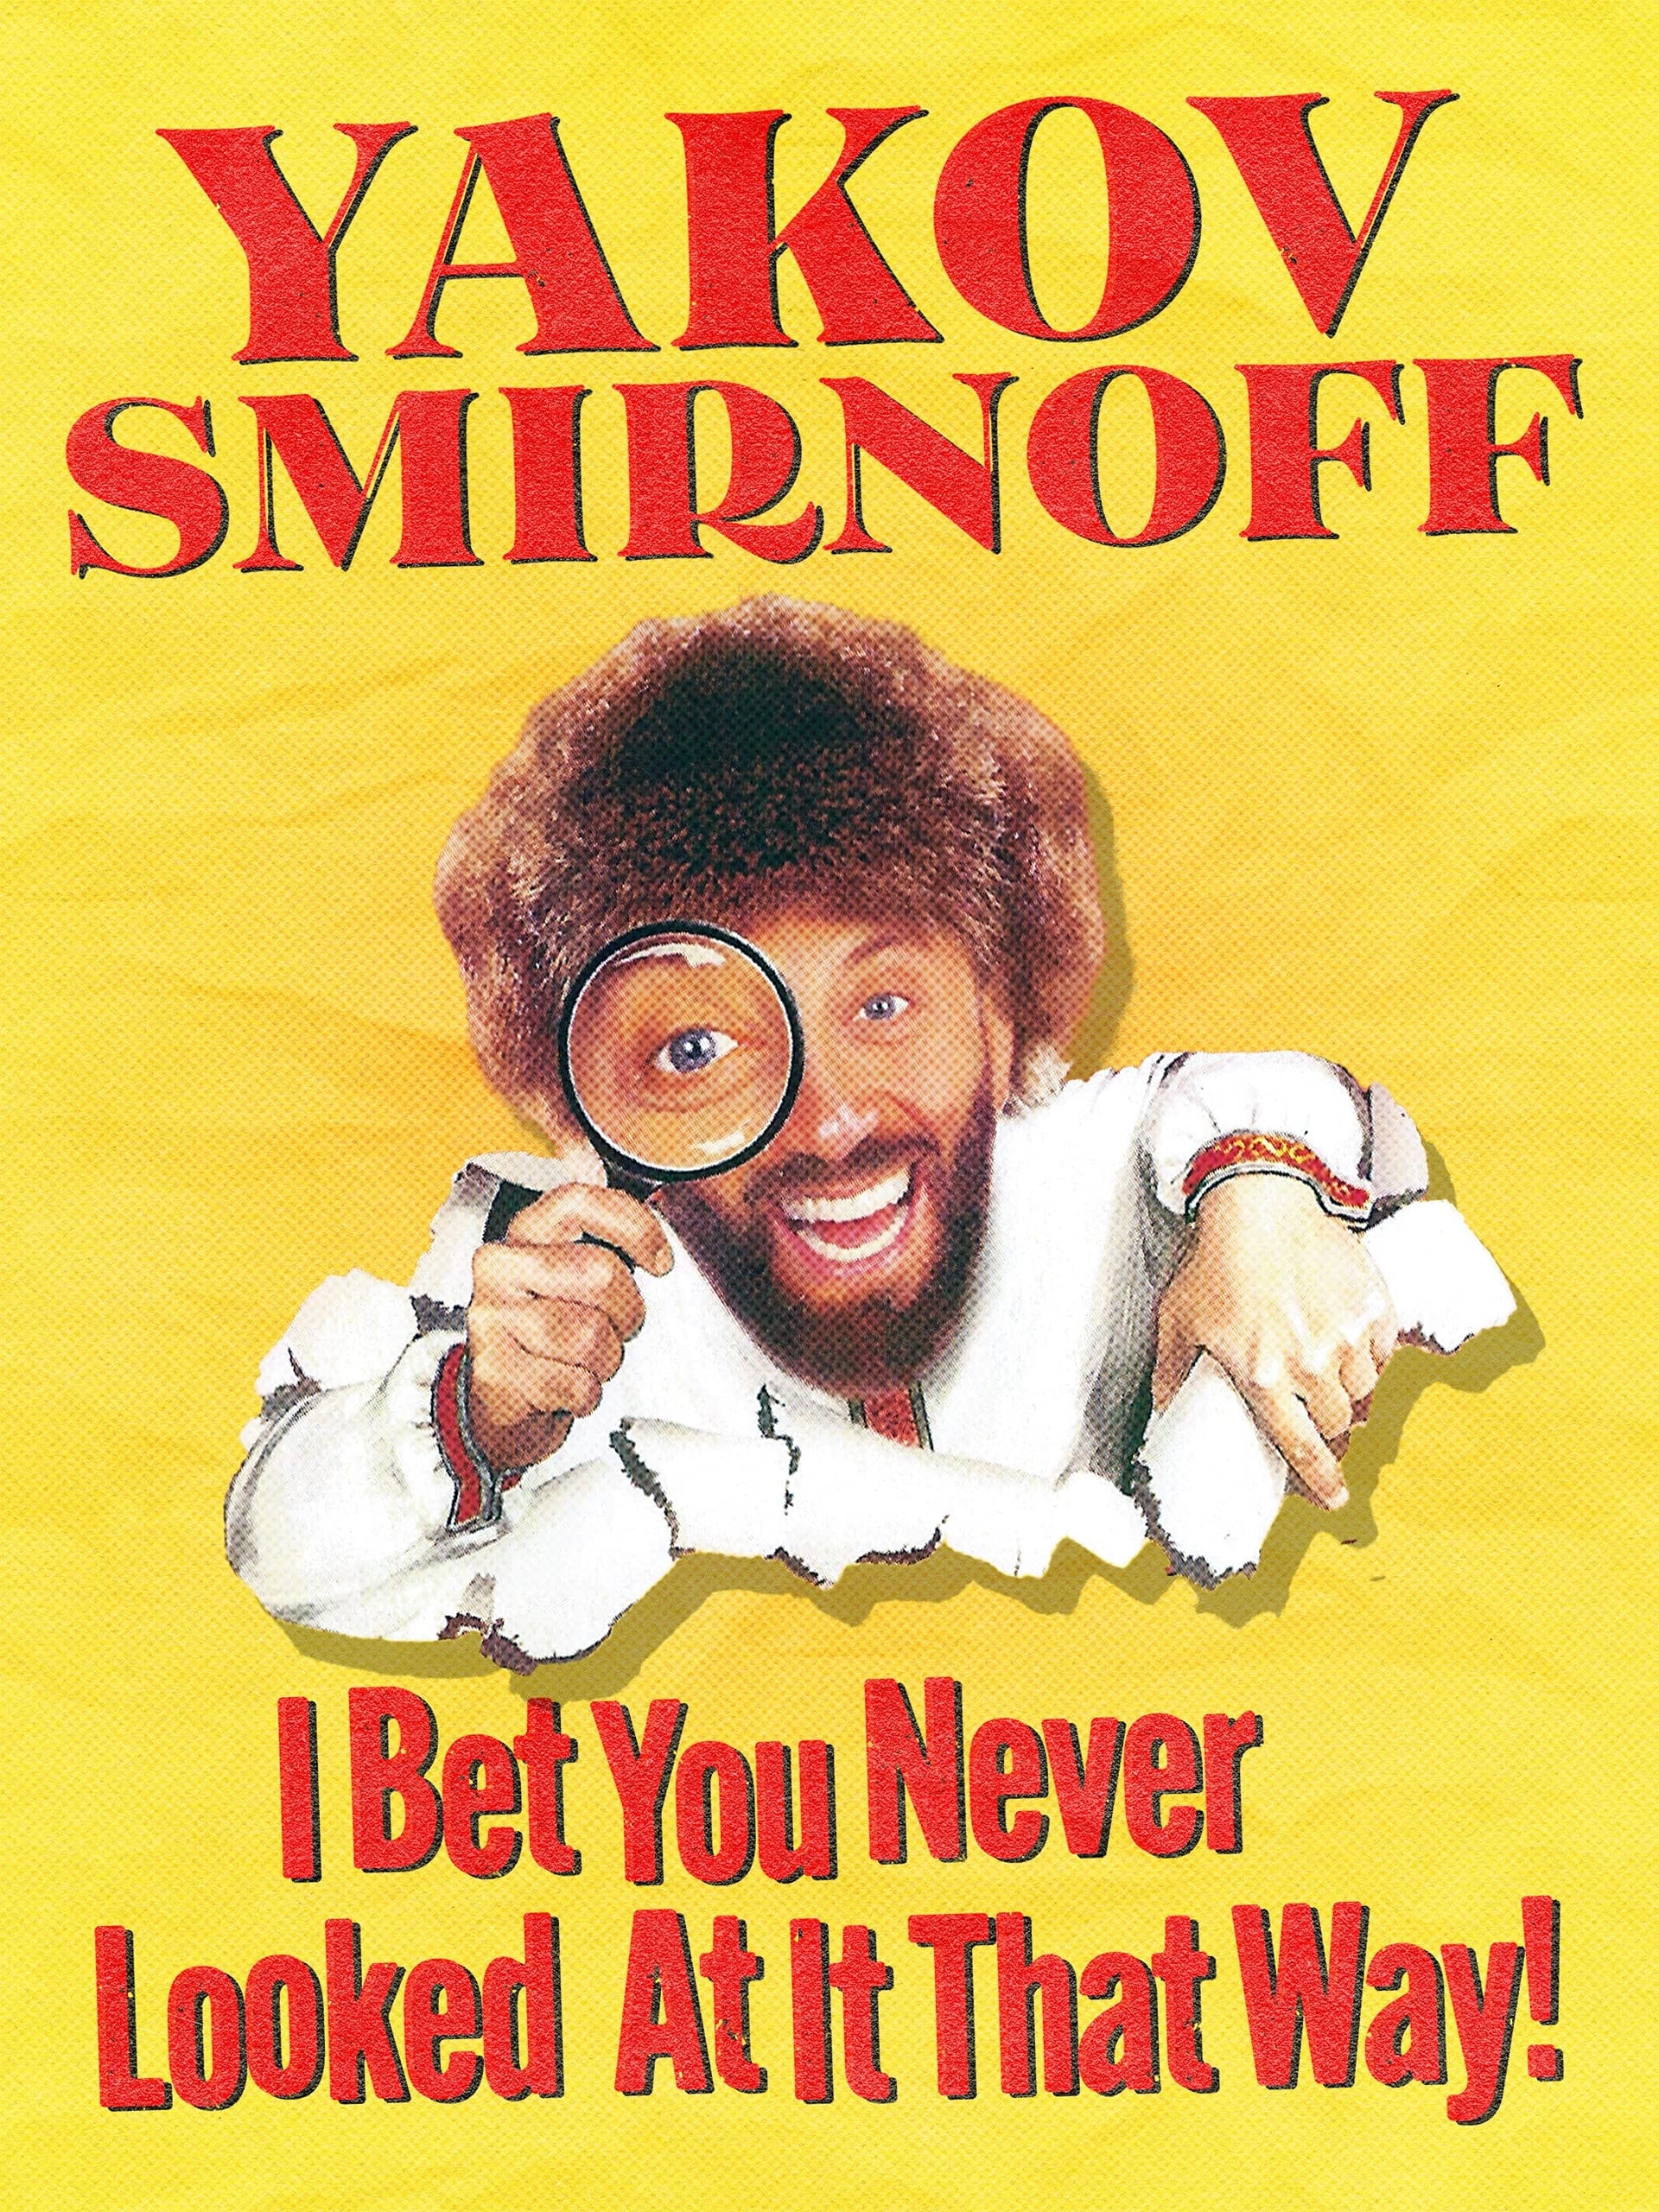 Yakov Smirnoff: I Bet You Never Looked At It That Way!